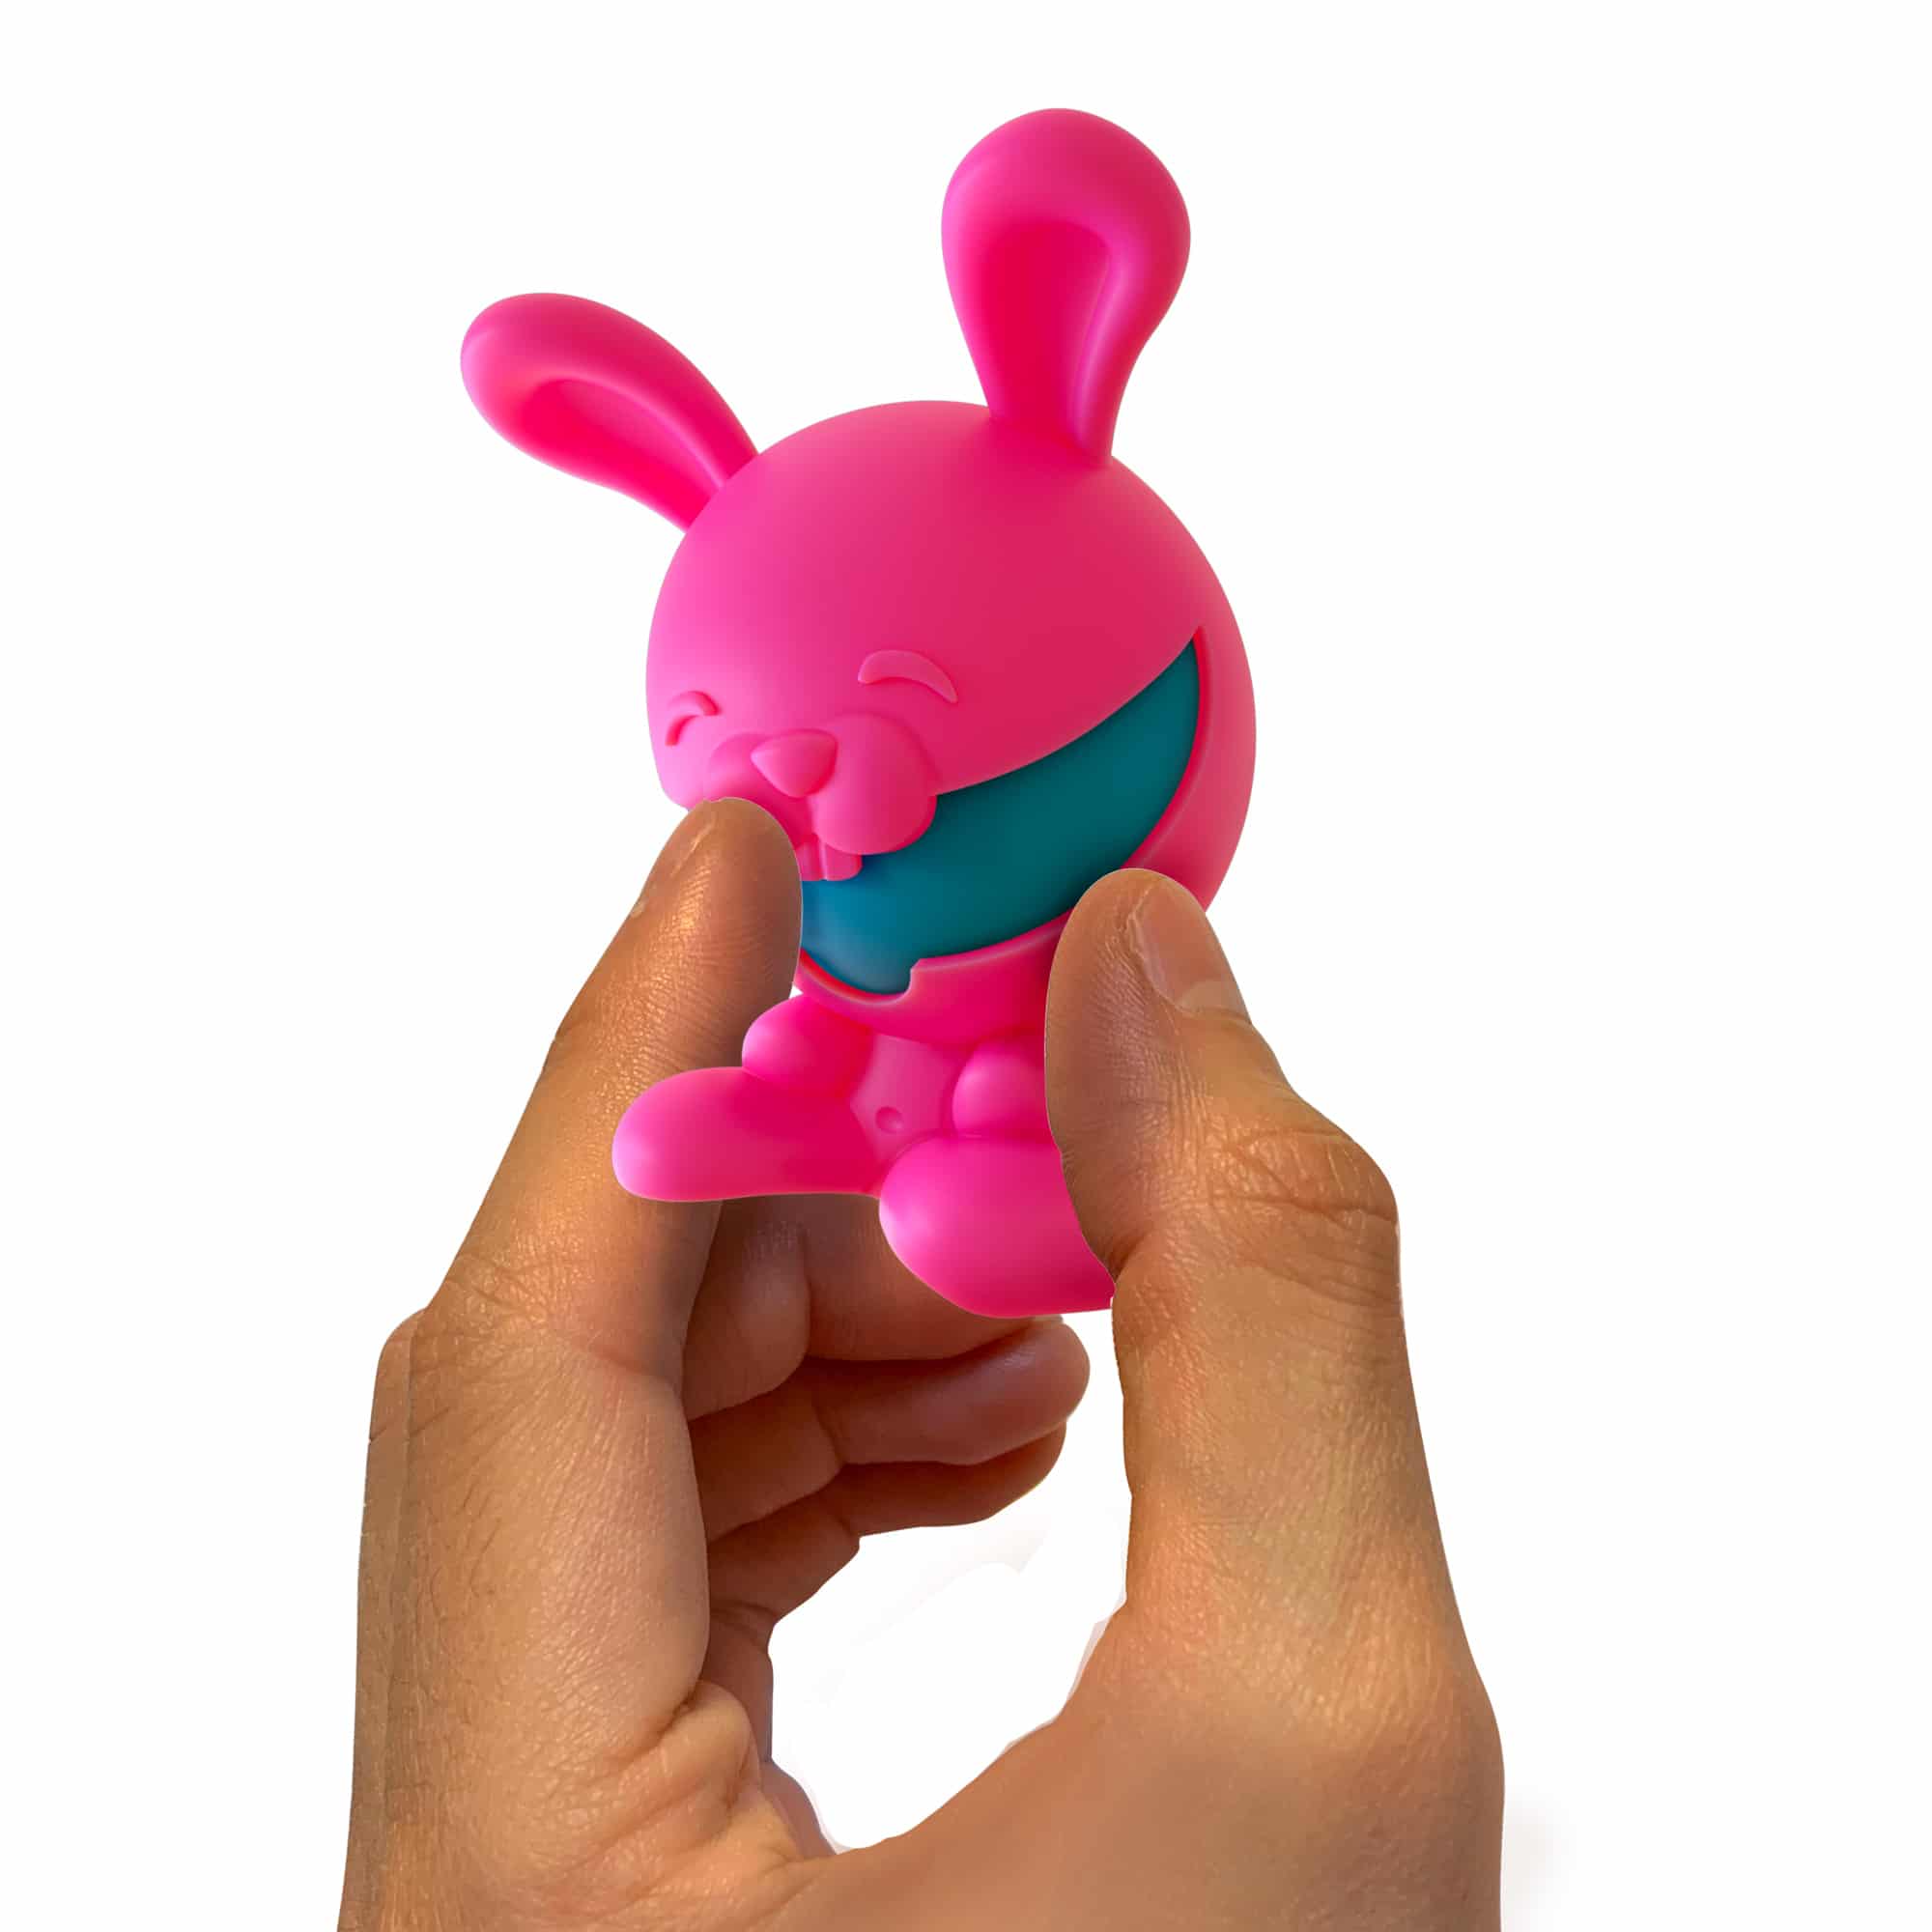 NeeDoh Dohjees Squish-able Toy – 1 Mystery Creature Inside!